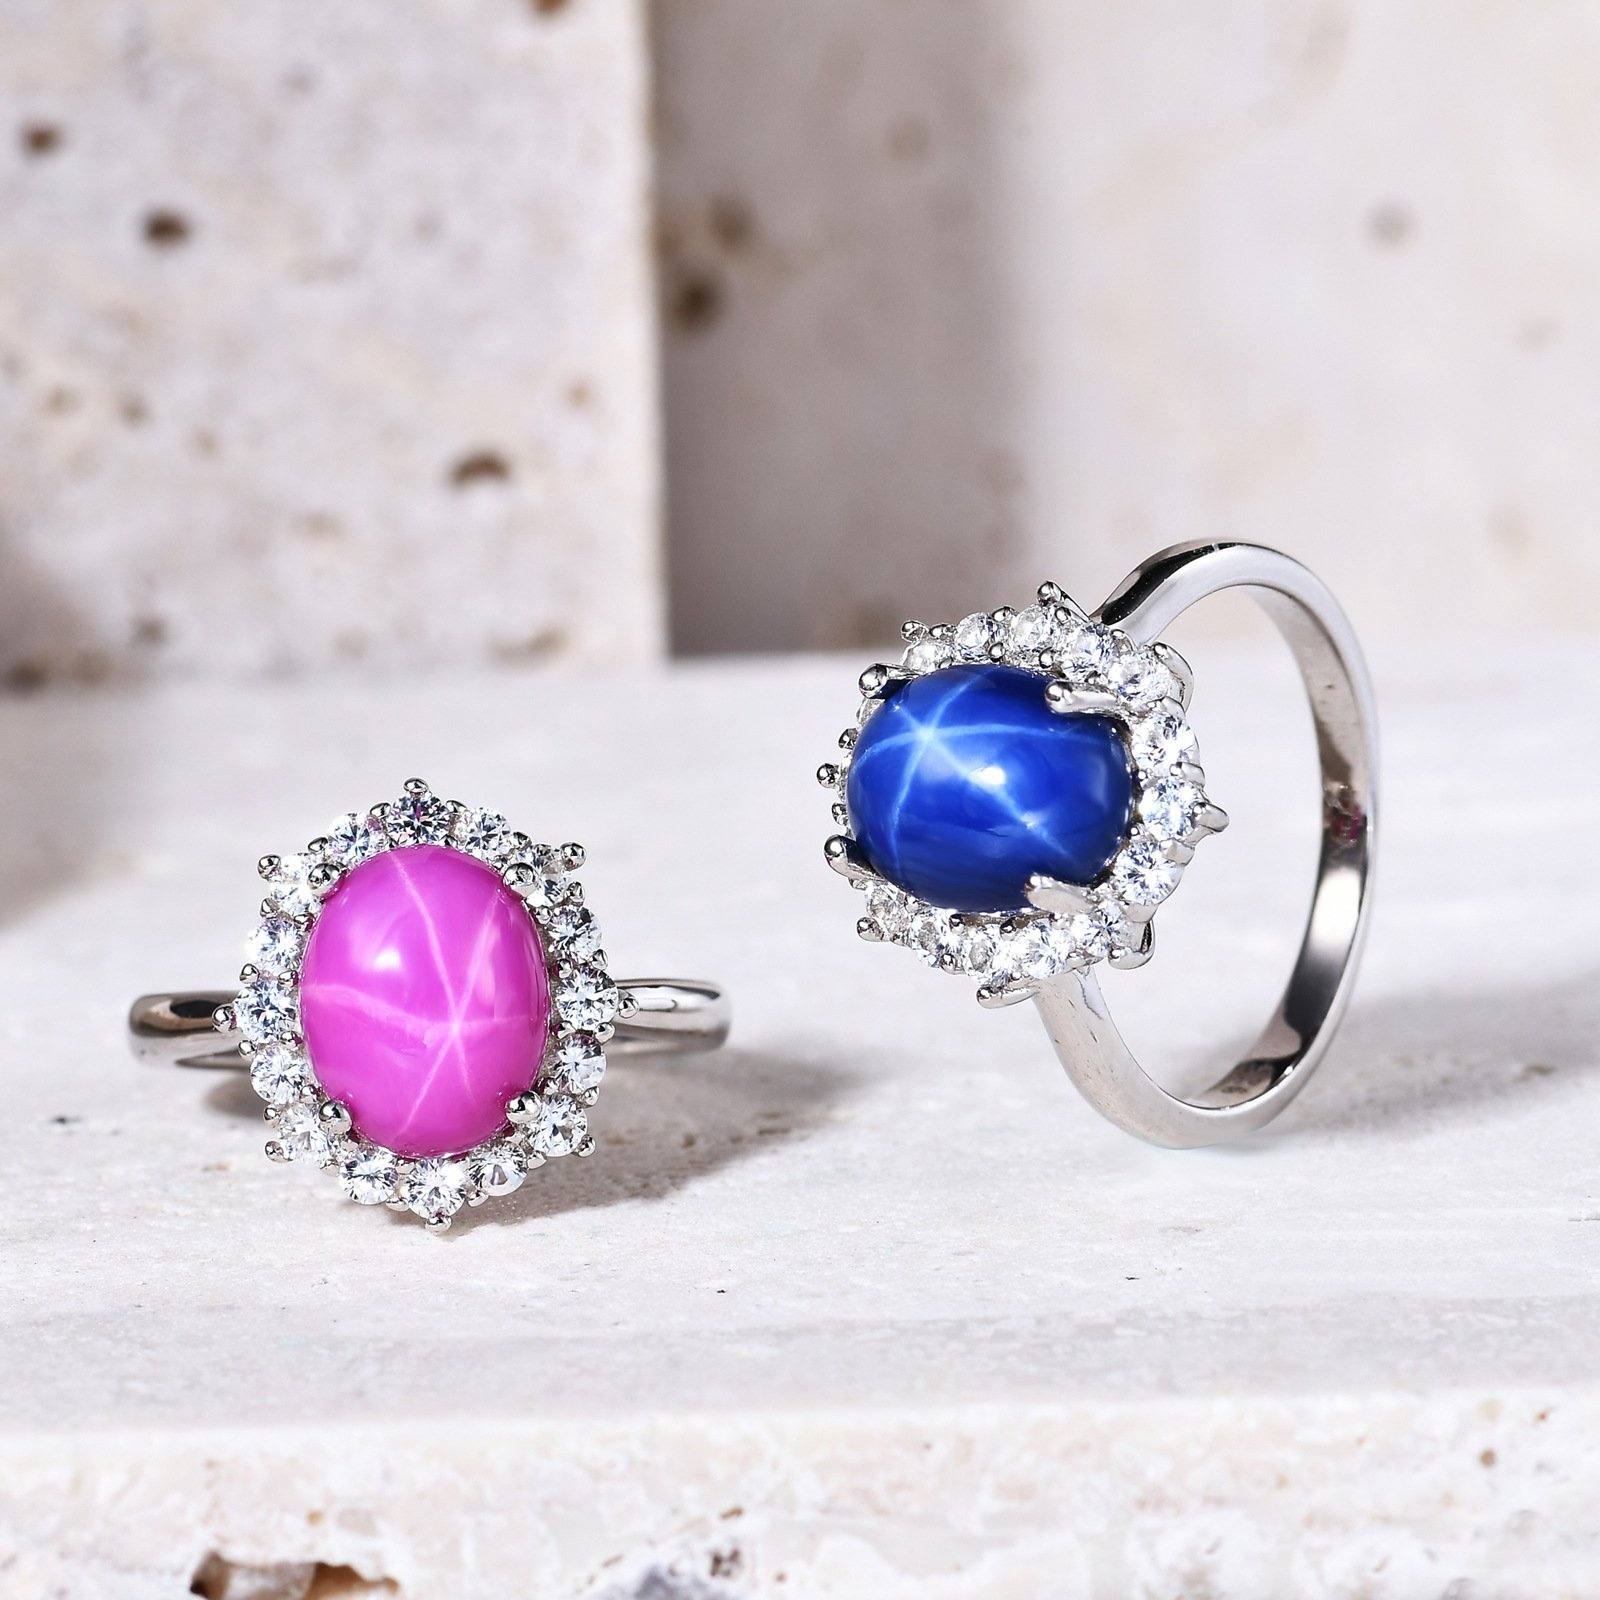 Star Sapphire Engagement Ring - HER'S